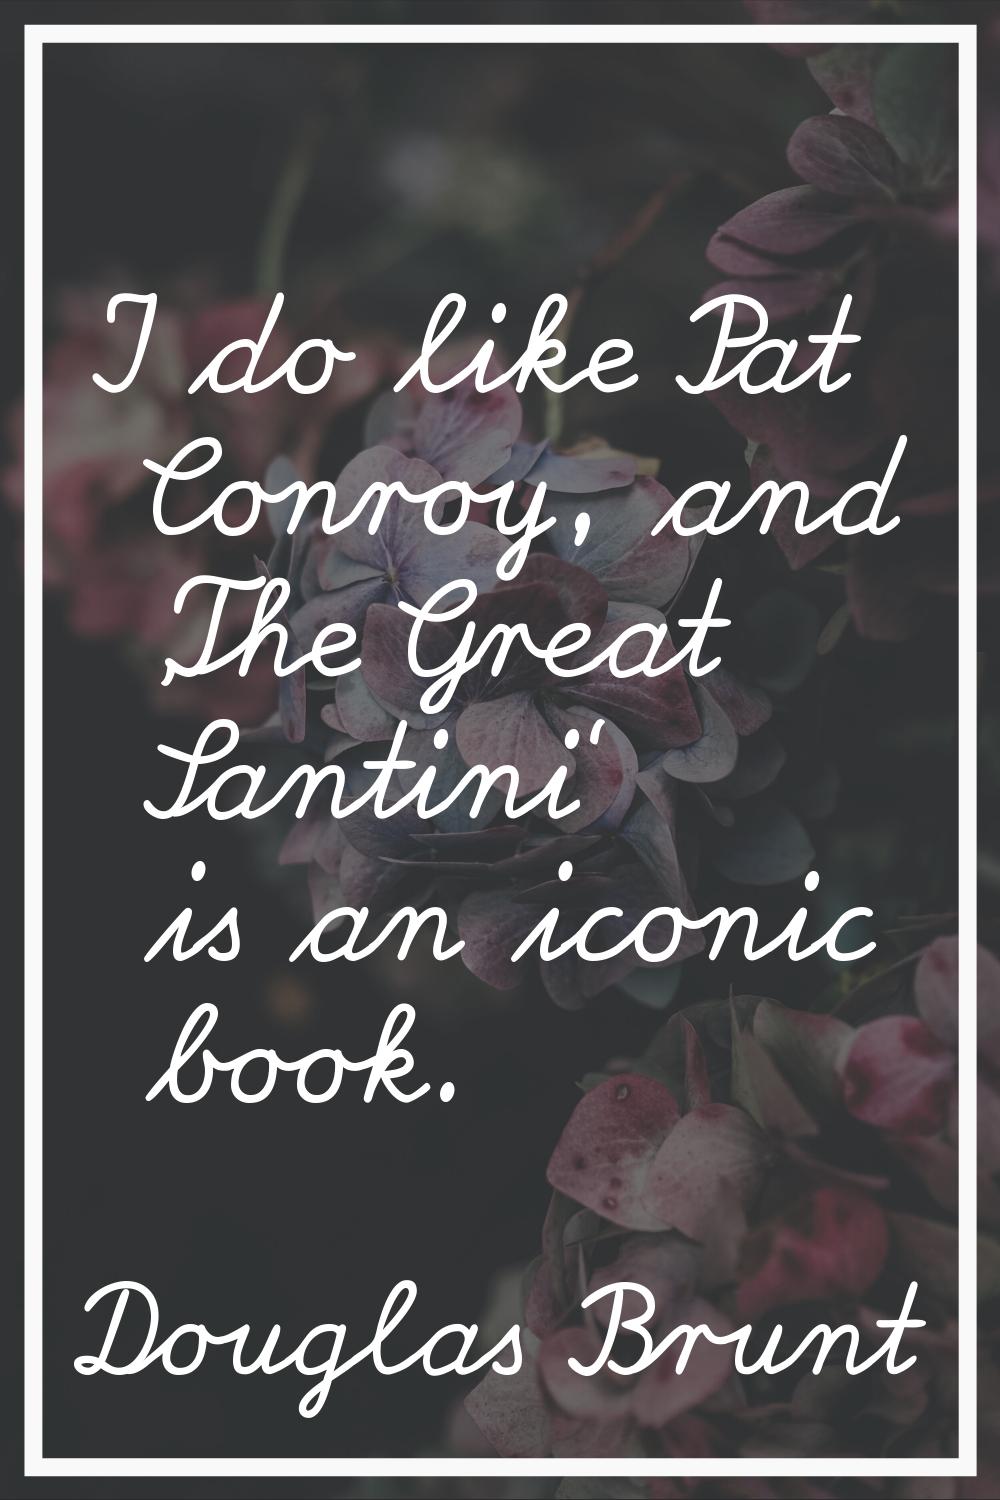 I do like Pat Conroy, and 'The Great Santini' is an iconic book.